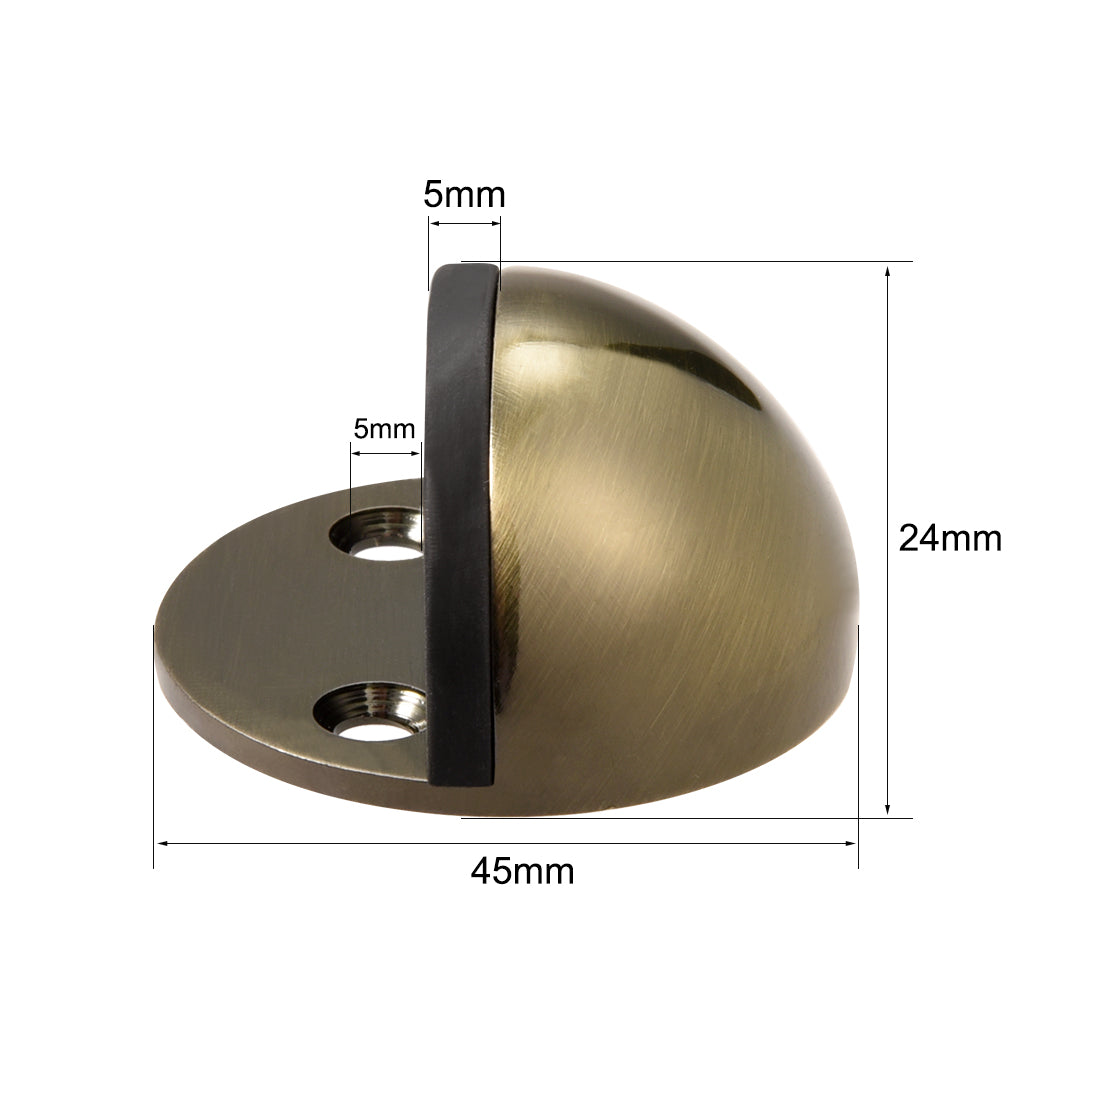 uxcell Uxcell Stainless Steel Floor Door Stopper with Rubber Bumper Adhesive/Screw Mounted Brass Tone